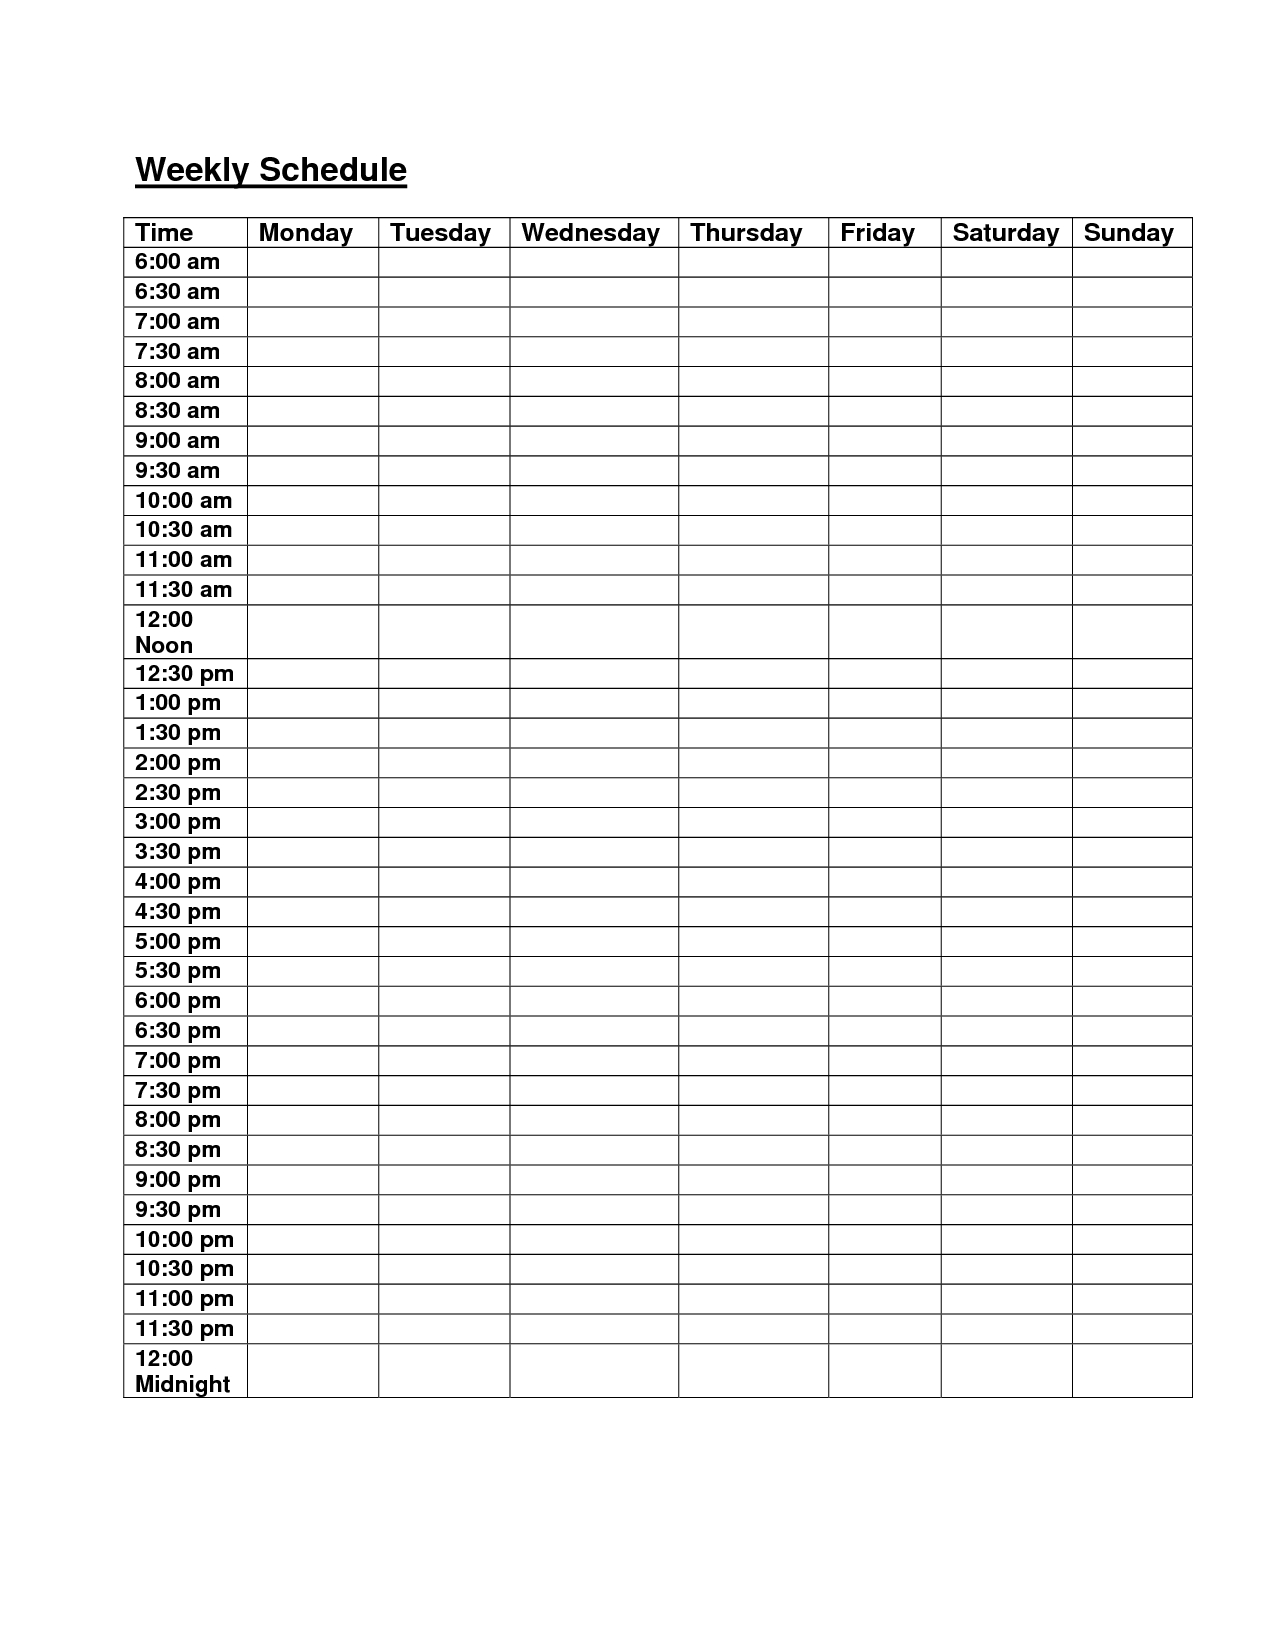 6Am Midnight Hourly Weekly Schedule Planner | Daily in Hourly Weekly Calendar